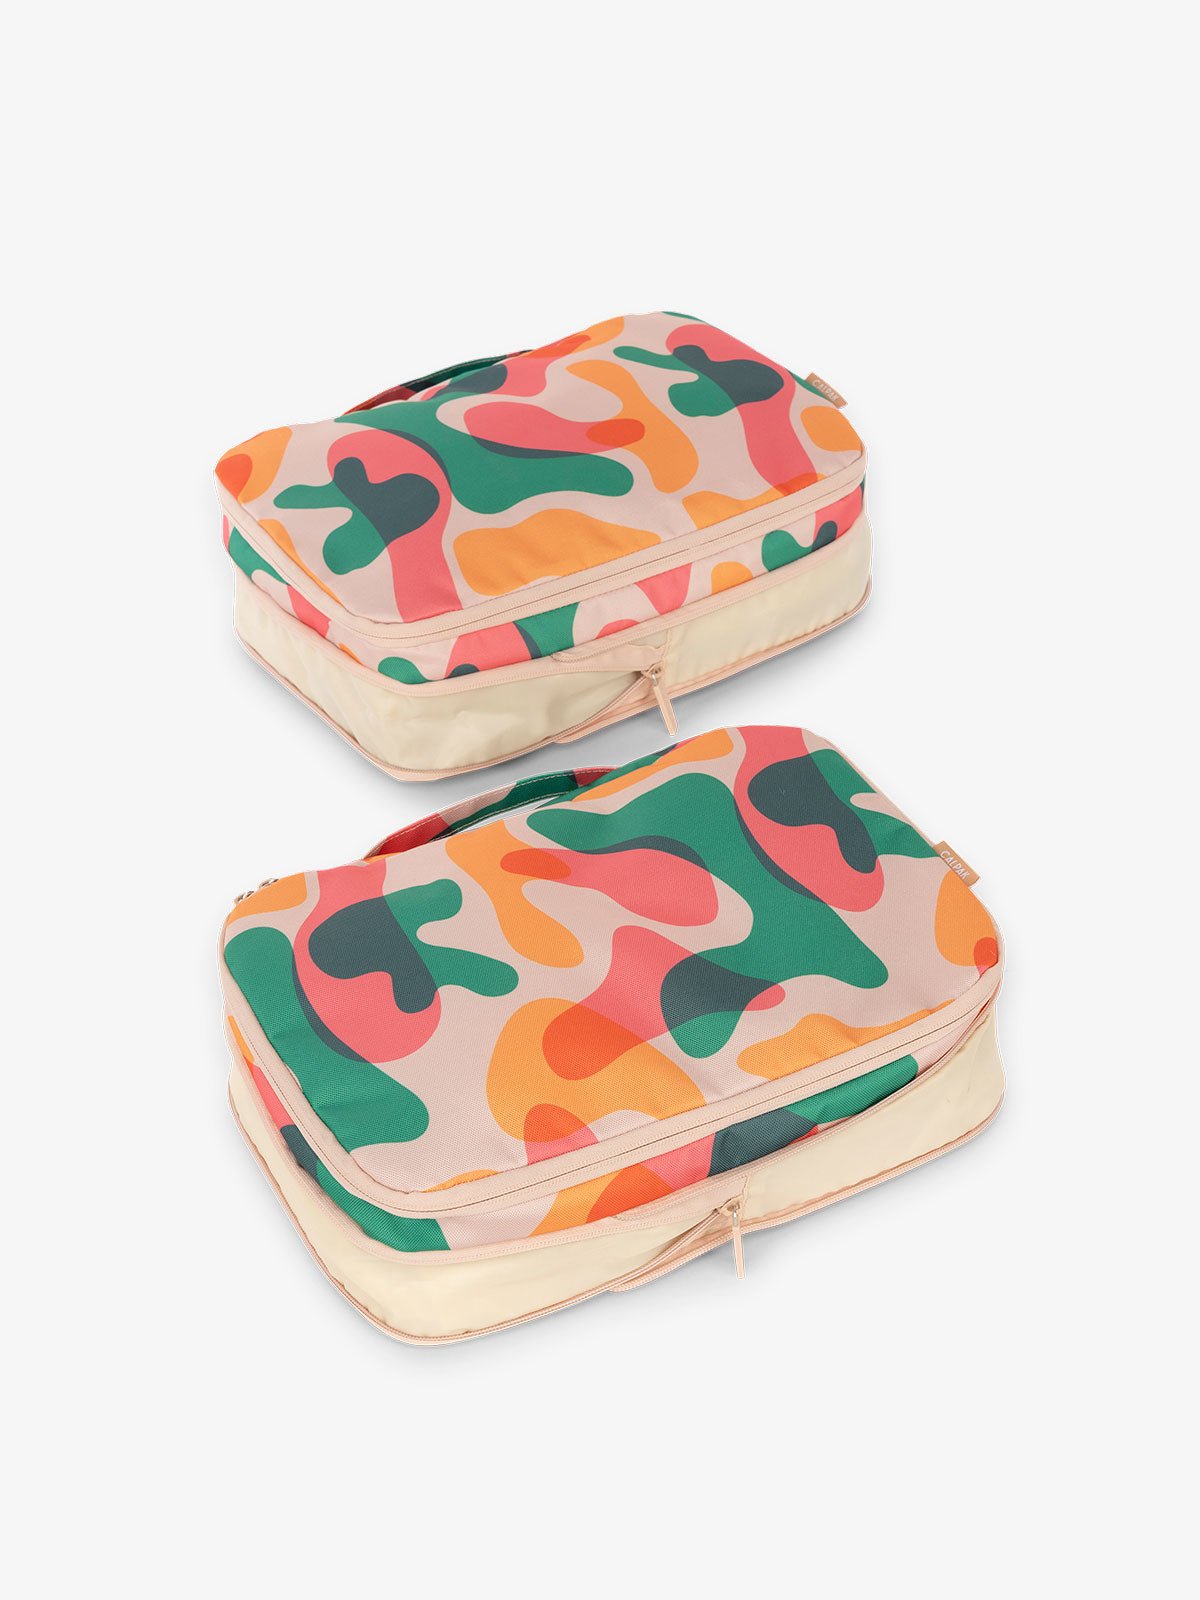 CALPAK compression packing cubes with handles in pink and green abstract print